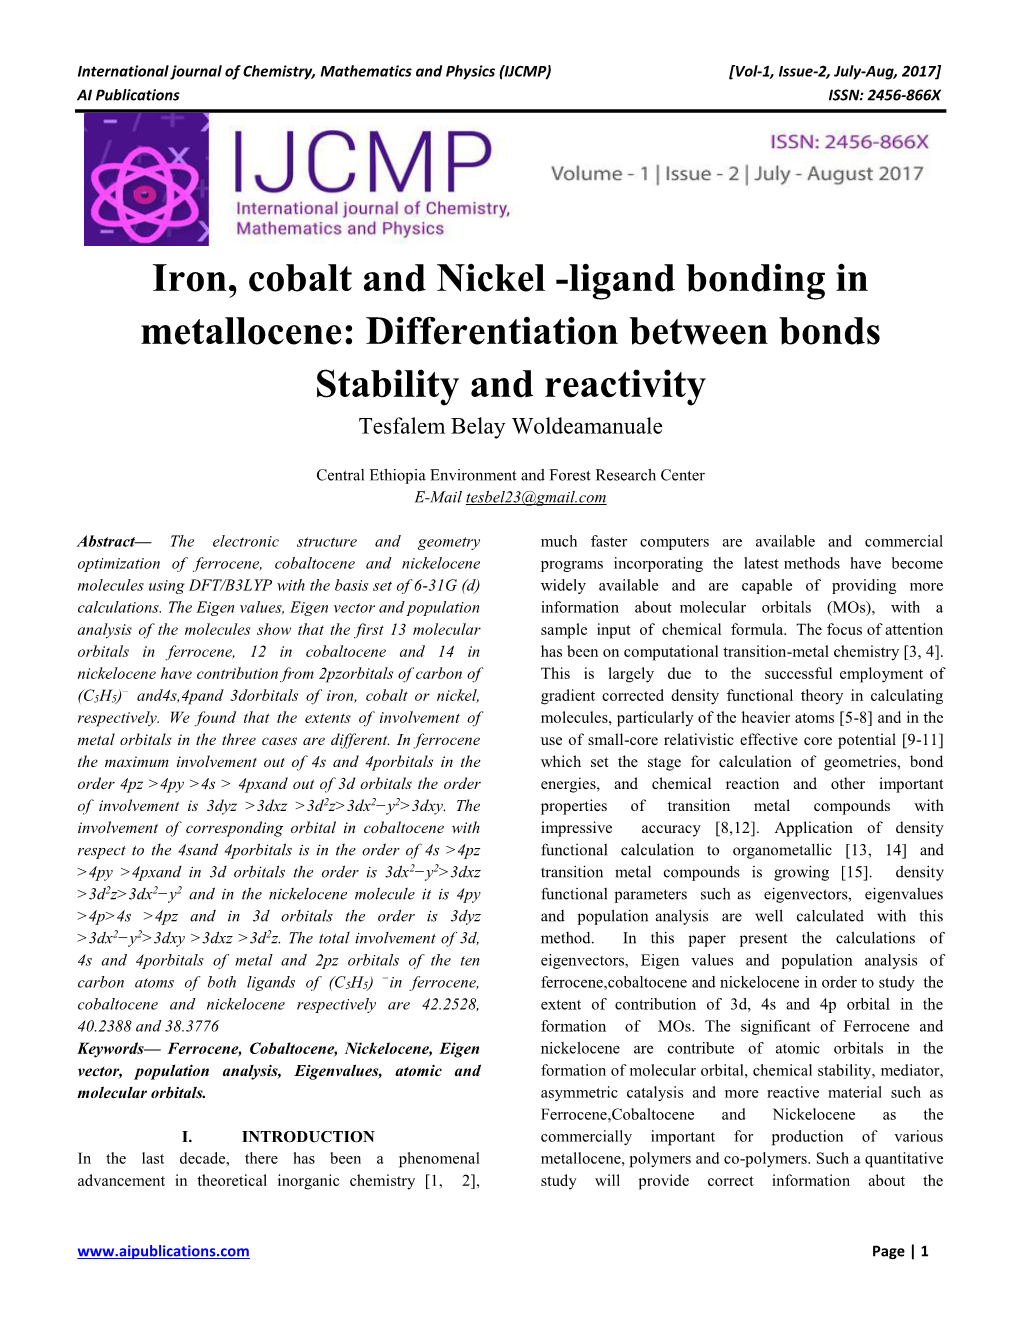 Iron, Cobalt and Nickel -Ligand Bonding in Metallocene: Differentiation Between Bonds Stability and Reactivity Tesfalem Belay Woldeamanuale